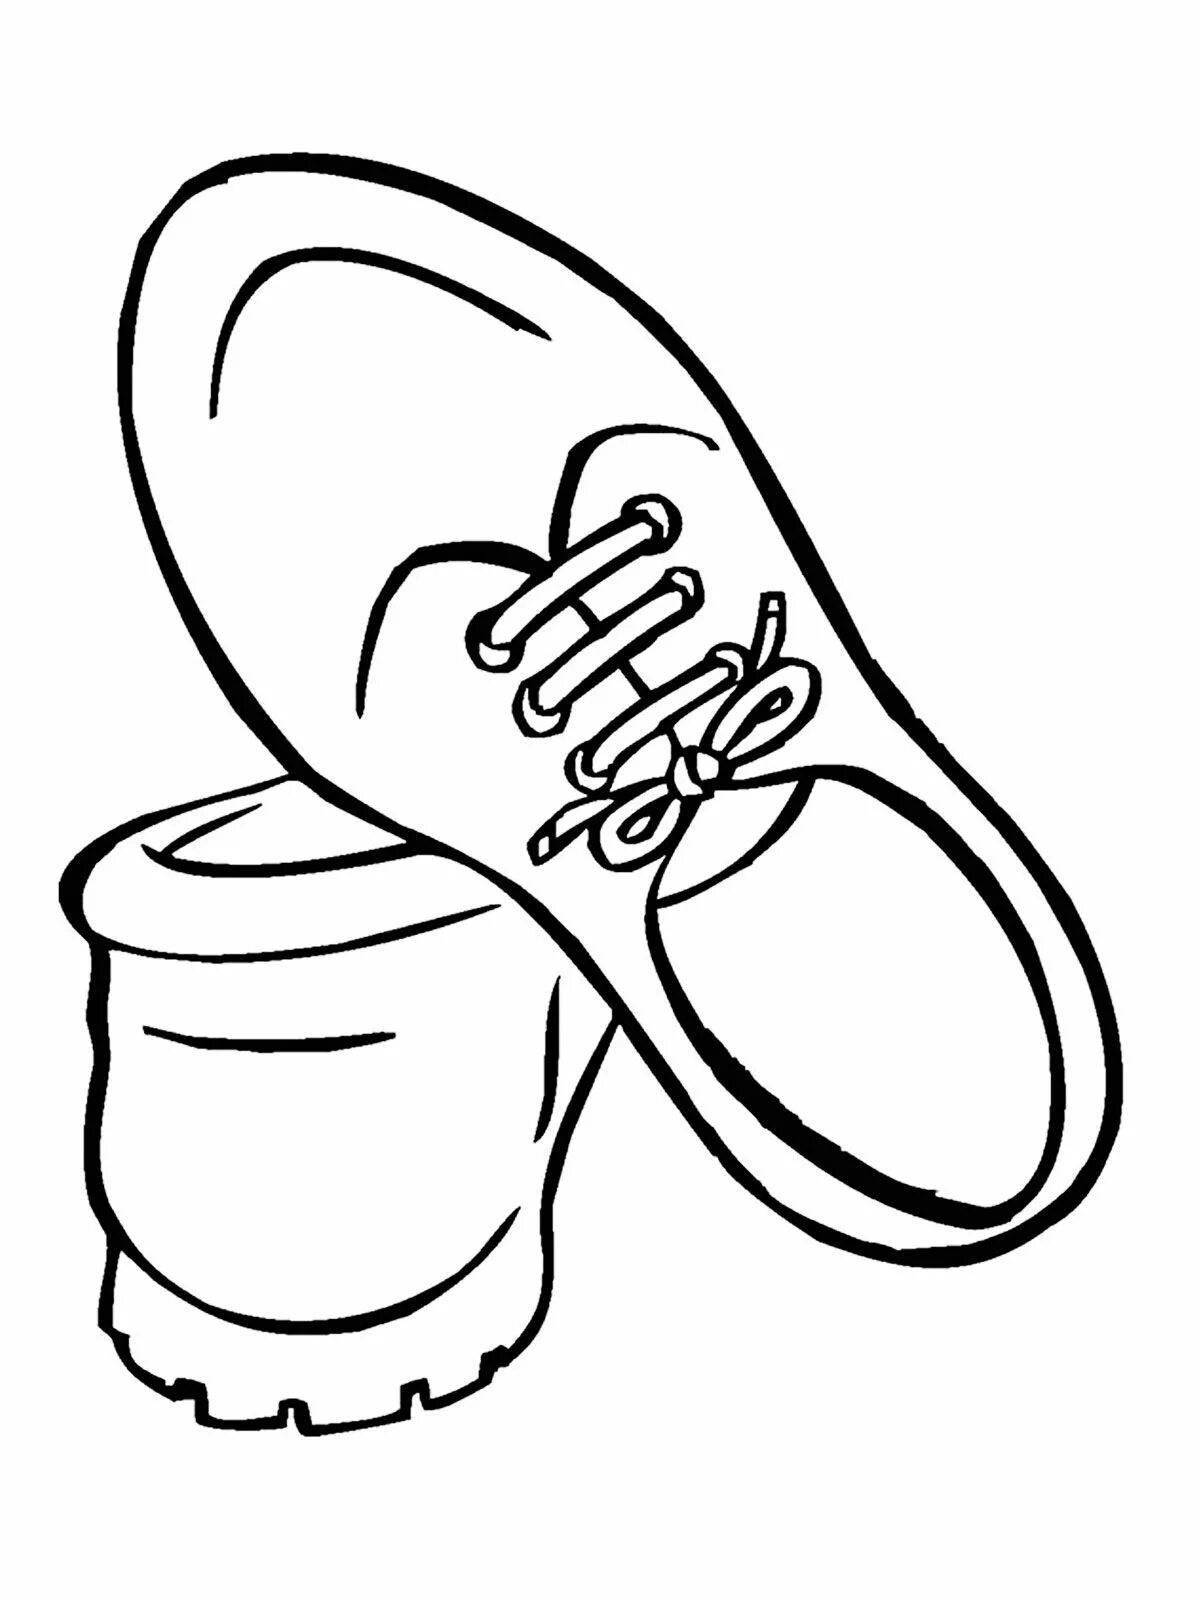 Coloring page stylish shoes